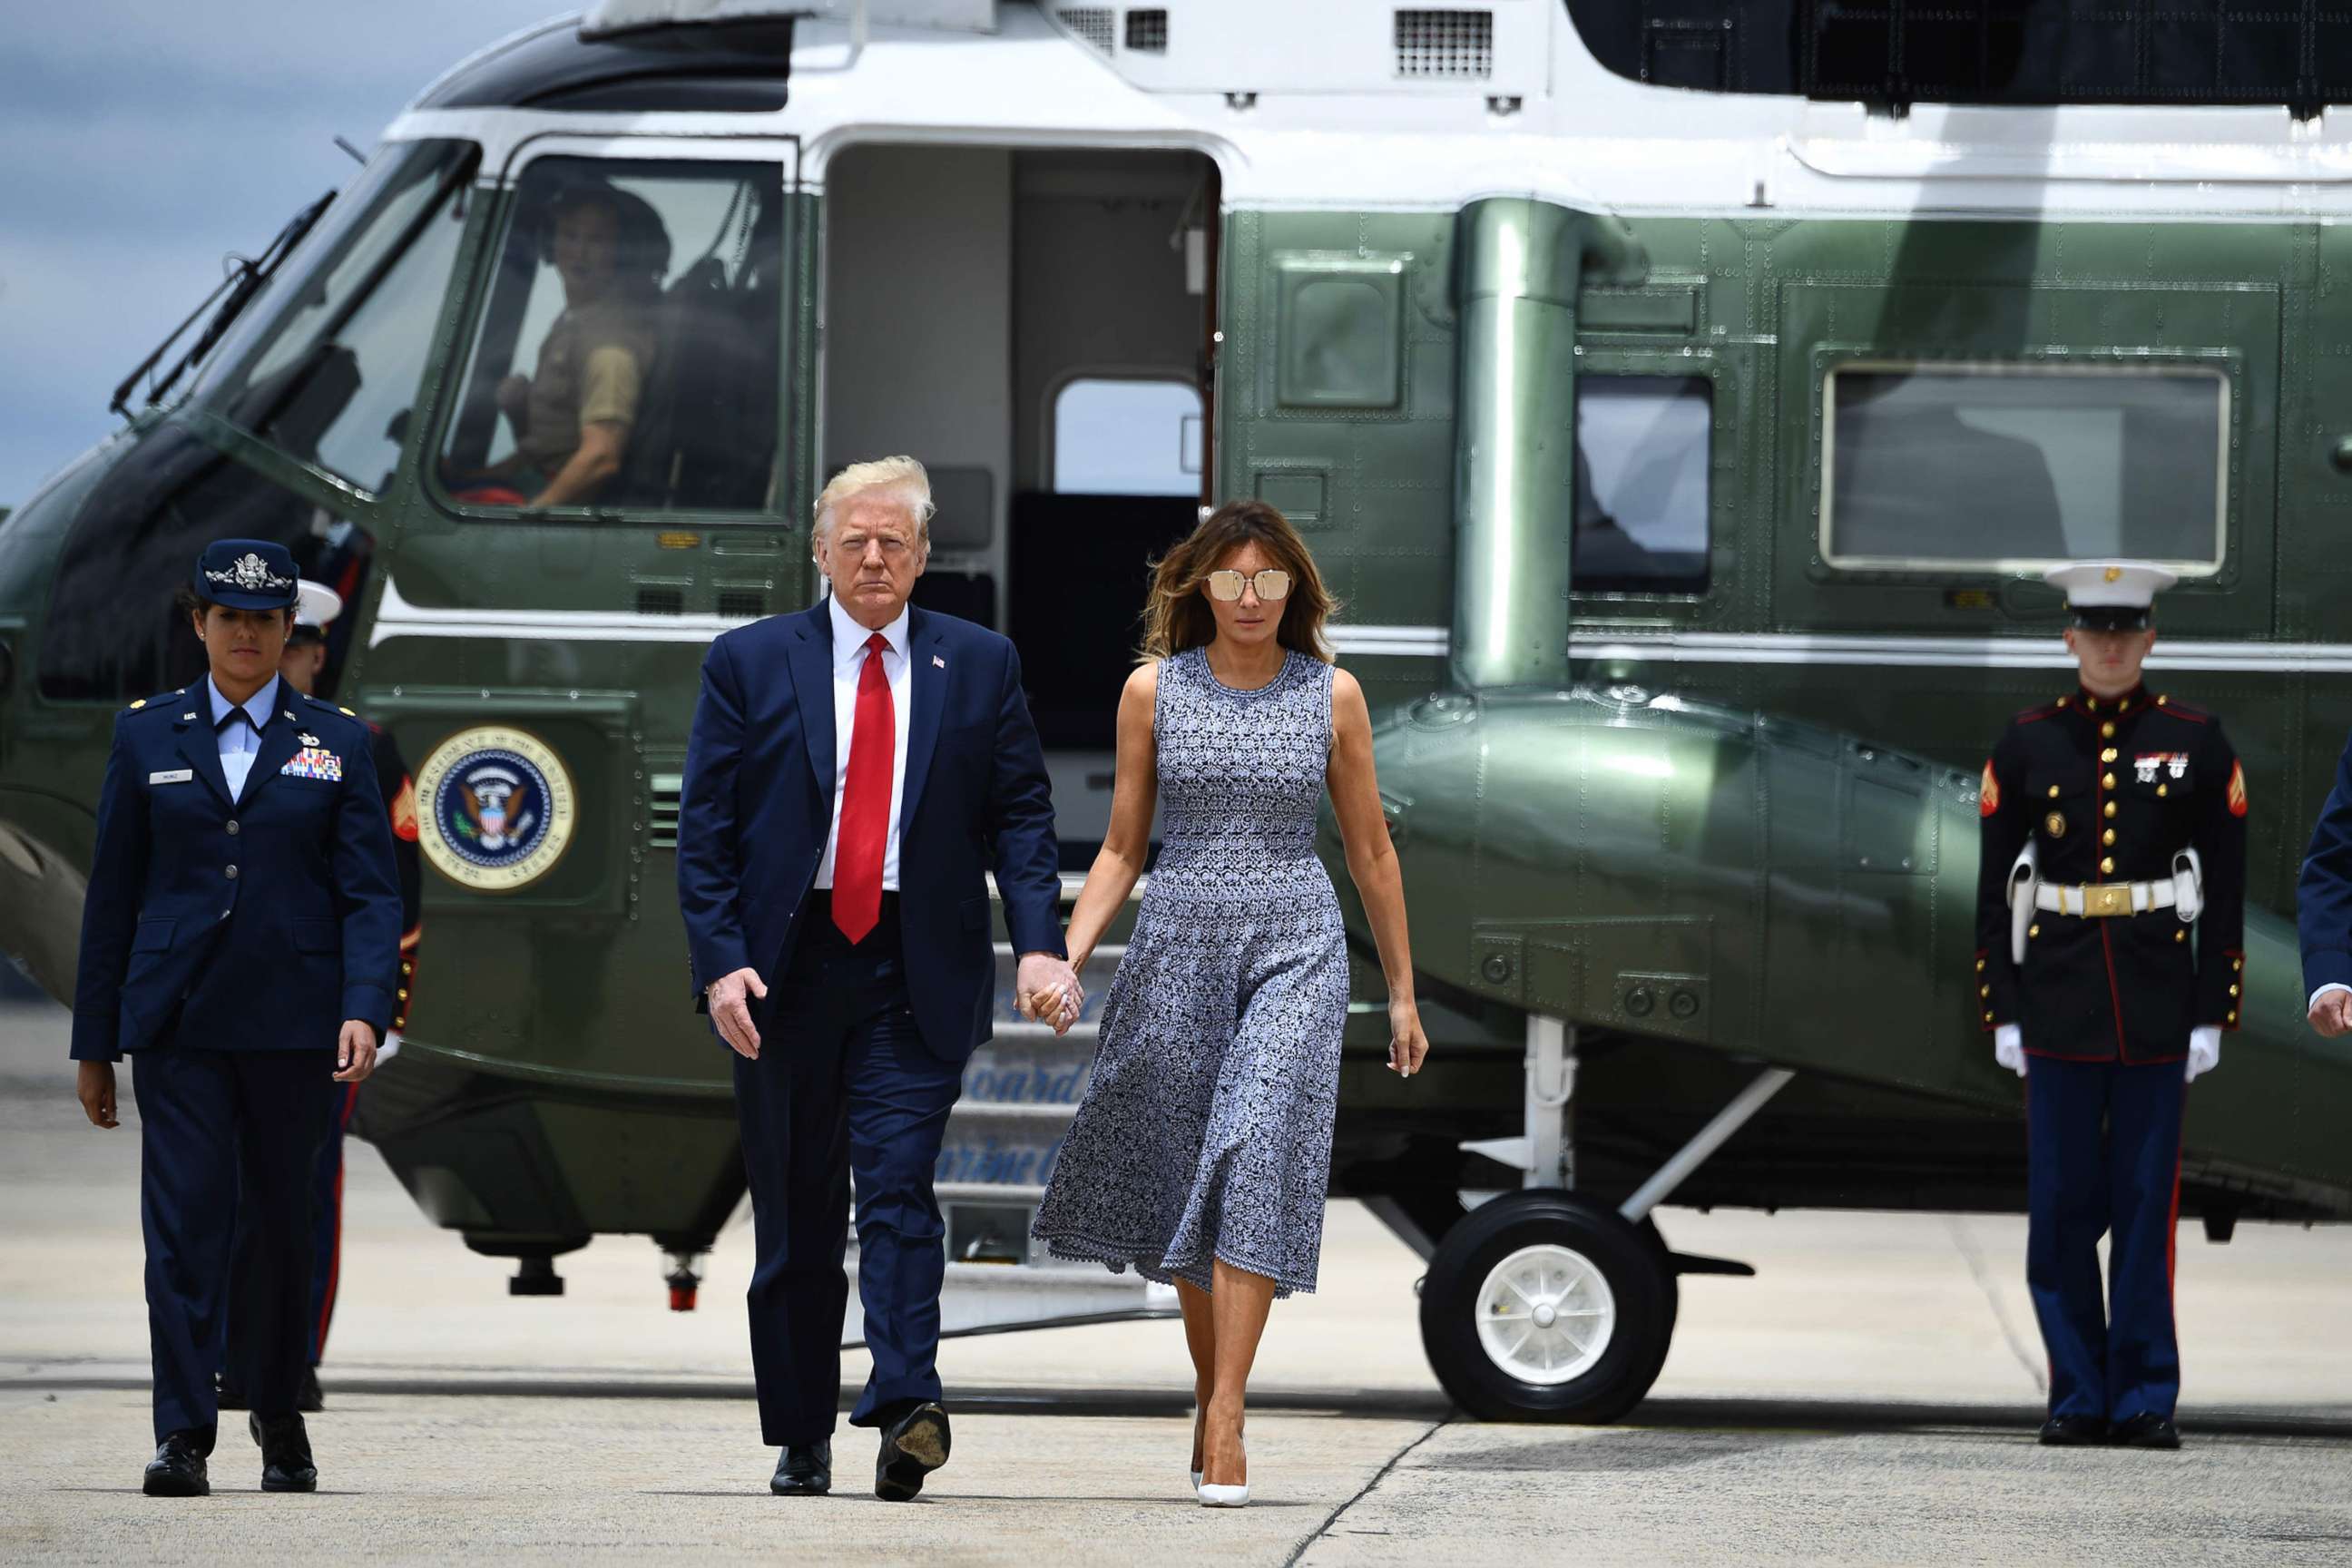 PHOTO: President Donald Trump and first lady Melania Trump board Air Force One at Joint Base Andrews in Maryland, May 27, 2020. President Trump headed to the Kennedy Space Center in Florida to attend the launch of SpaceX's historic first crewed launch.